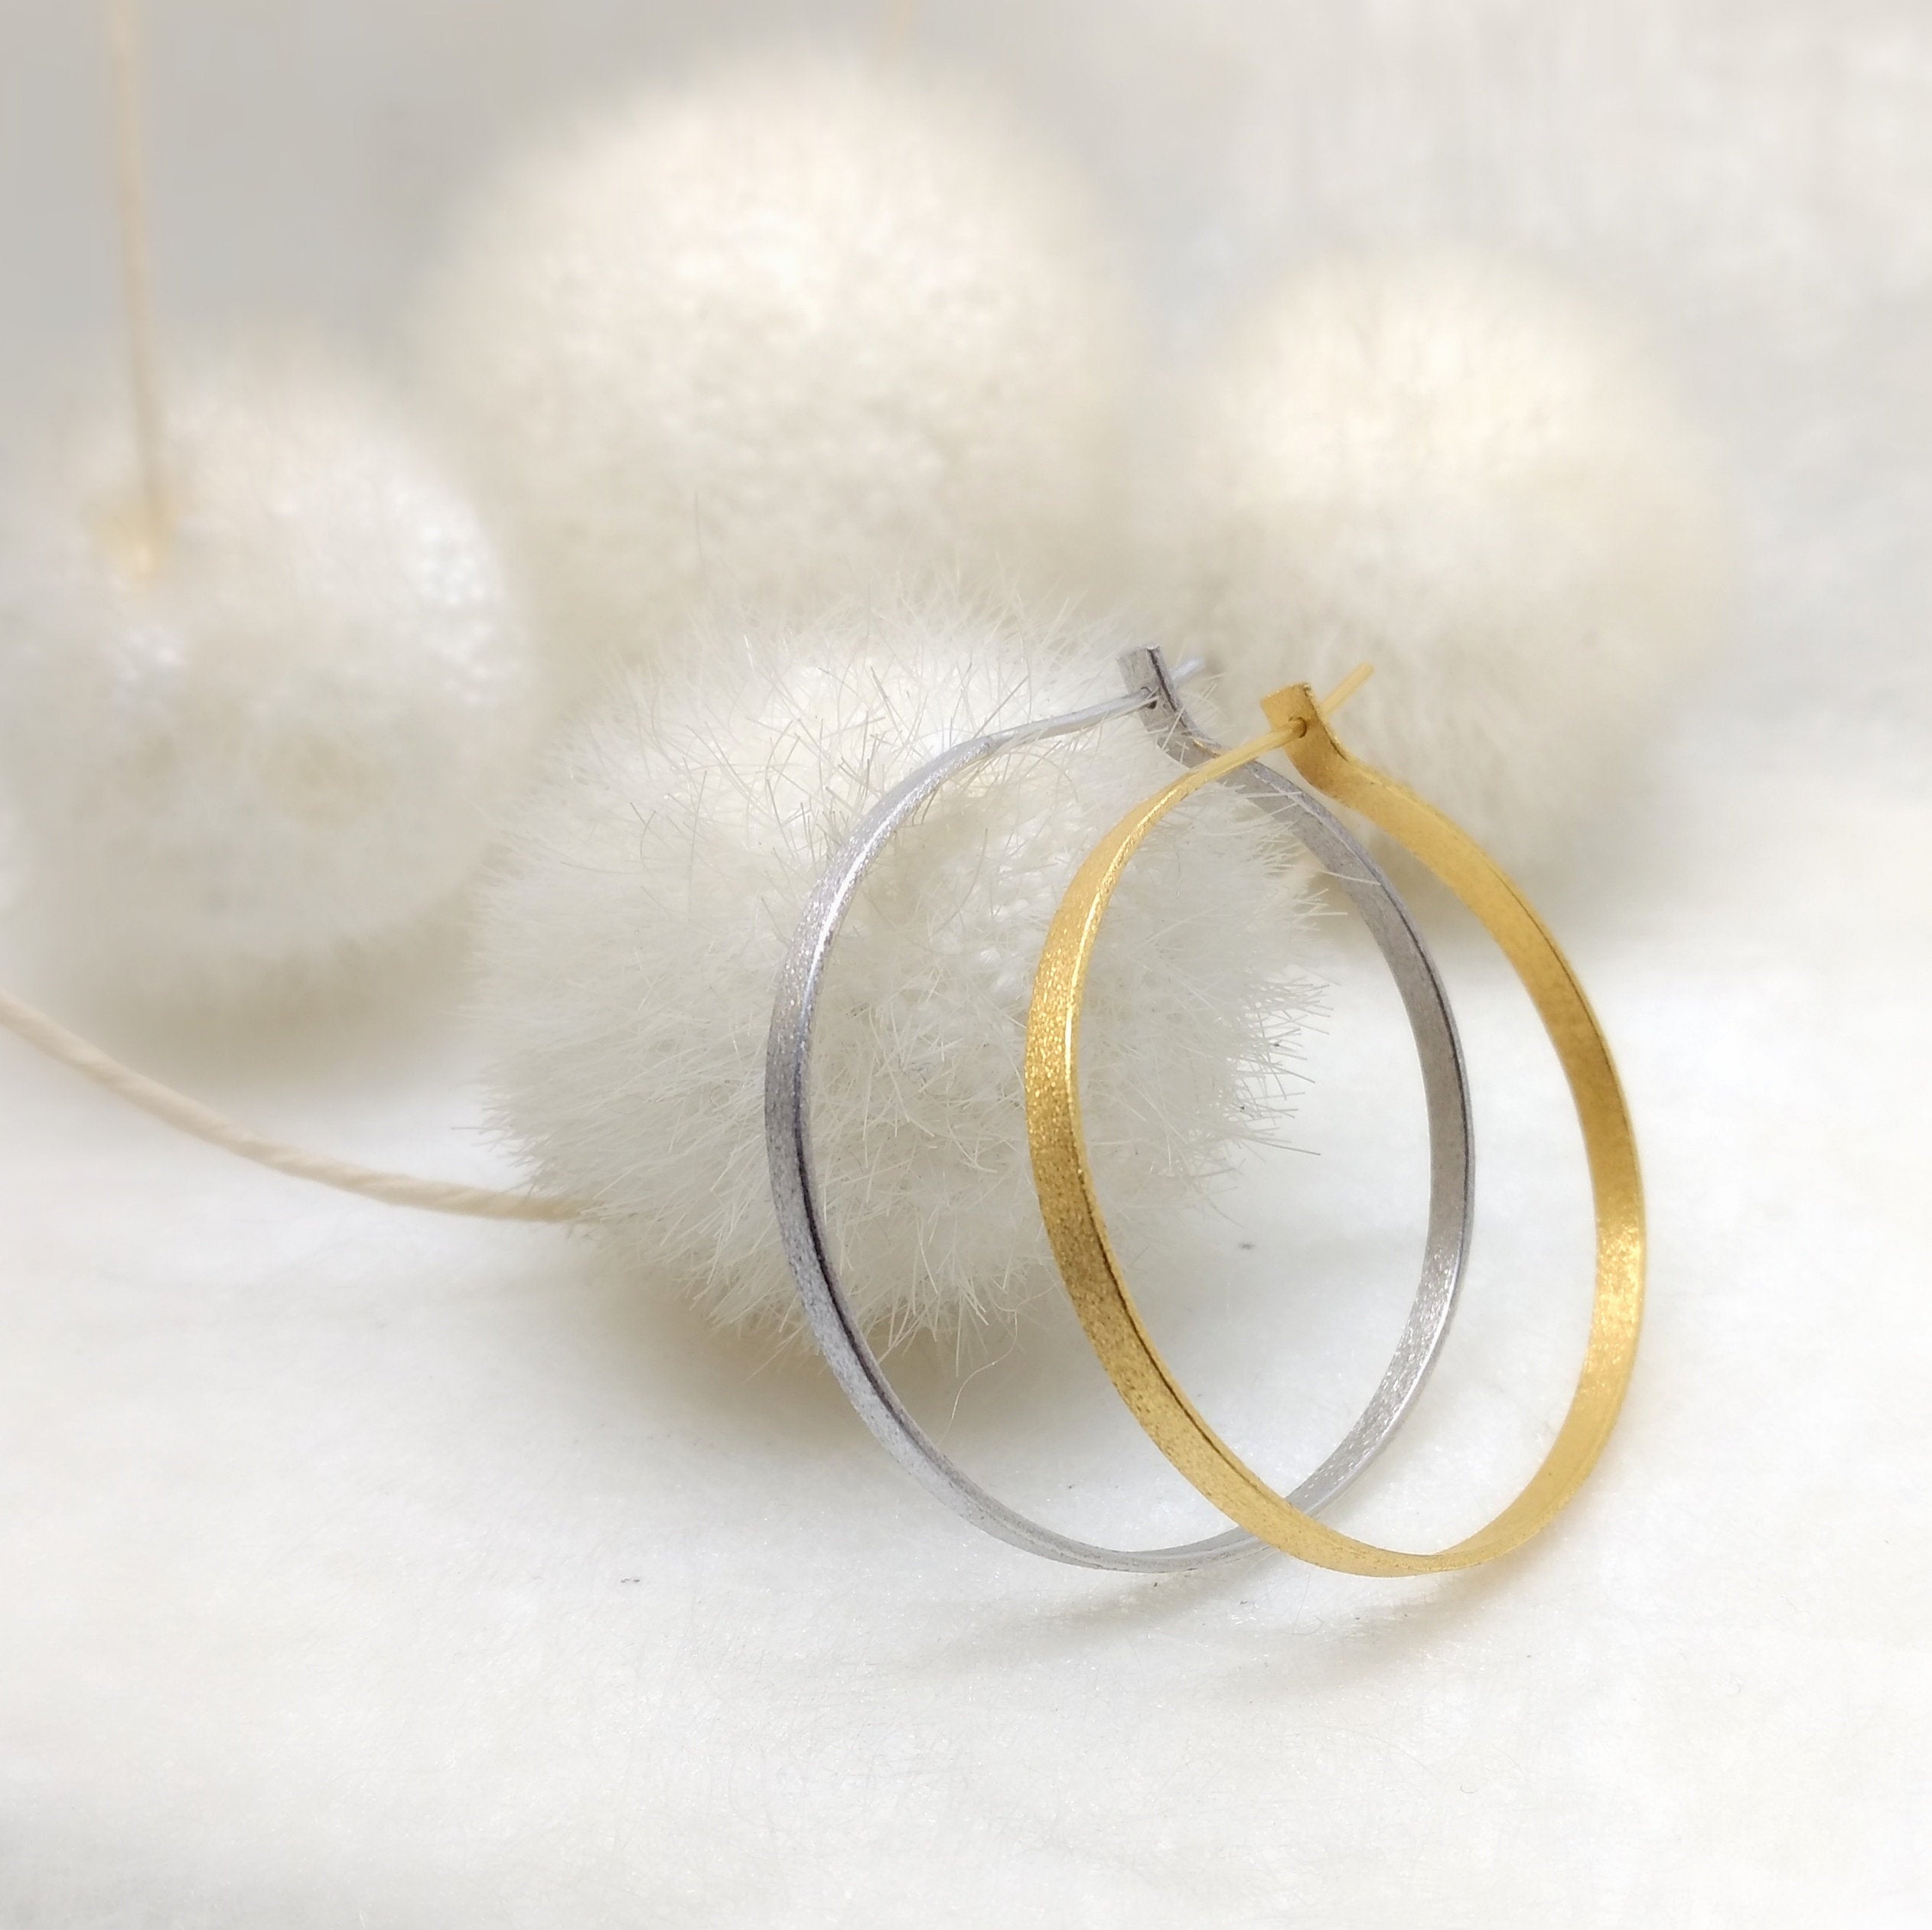 ImNos - big (ø 40mm) Sterling silver hoops in gold or rhodium plated